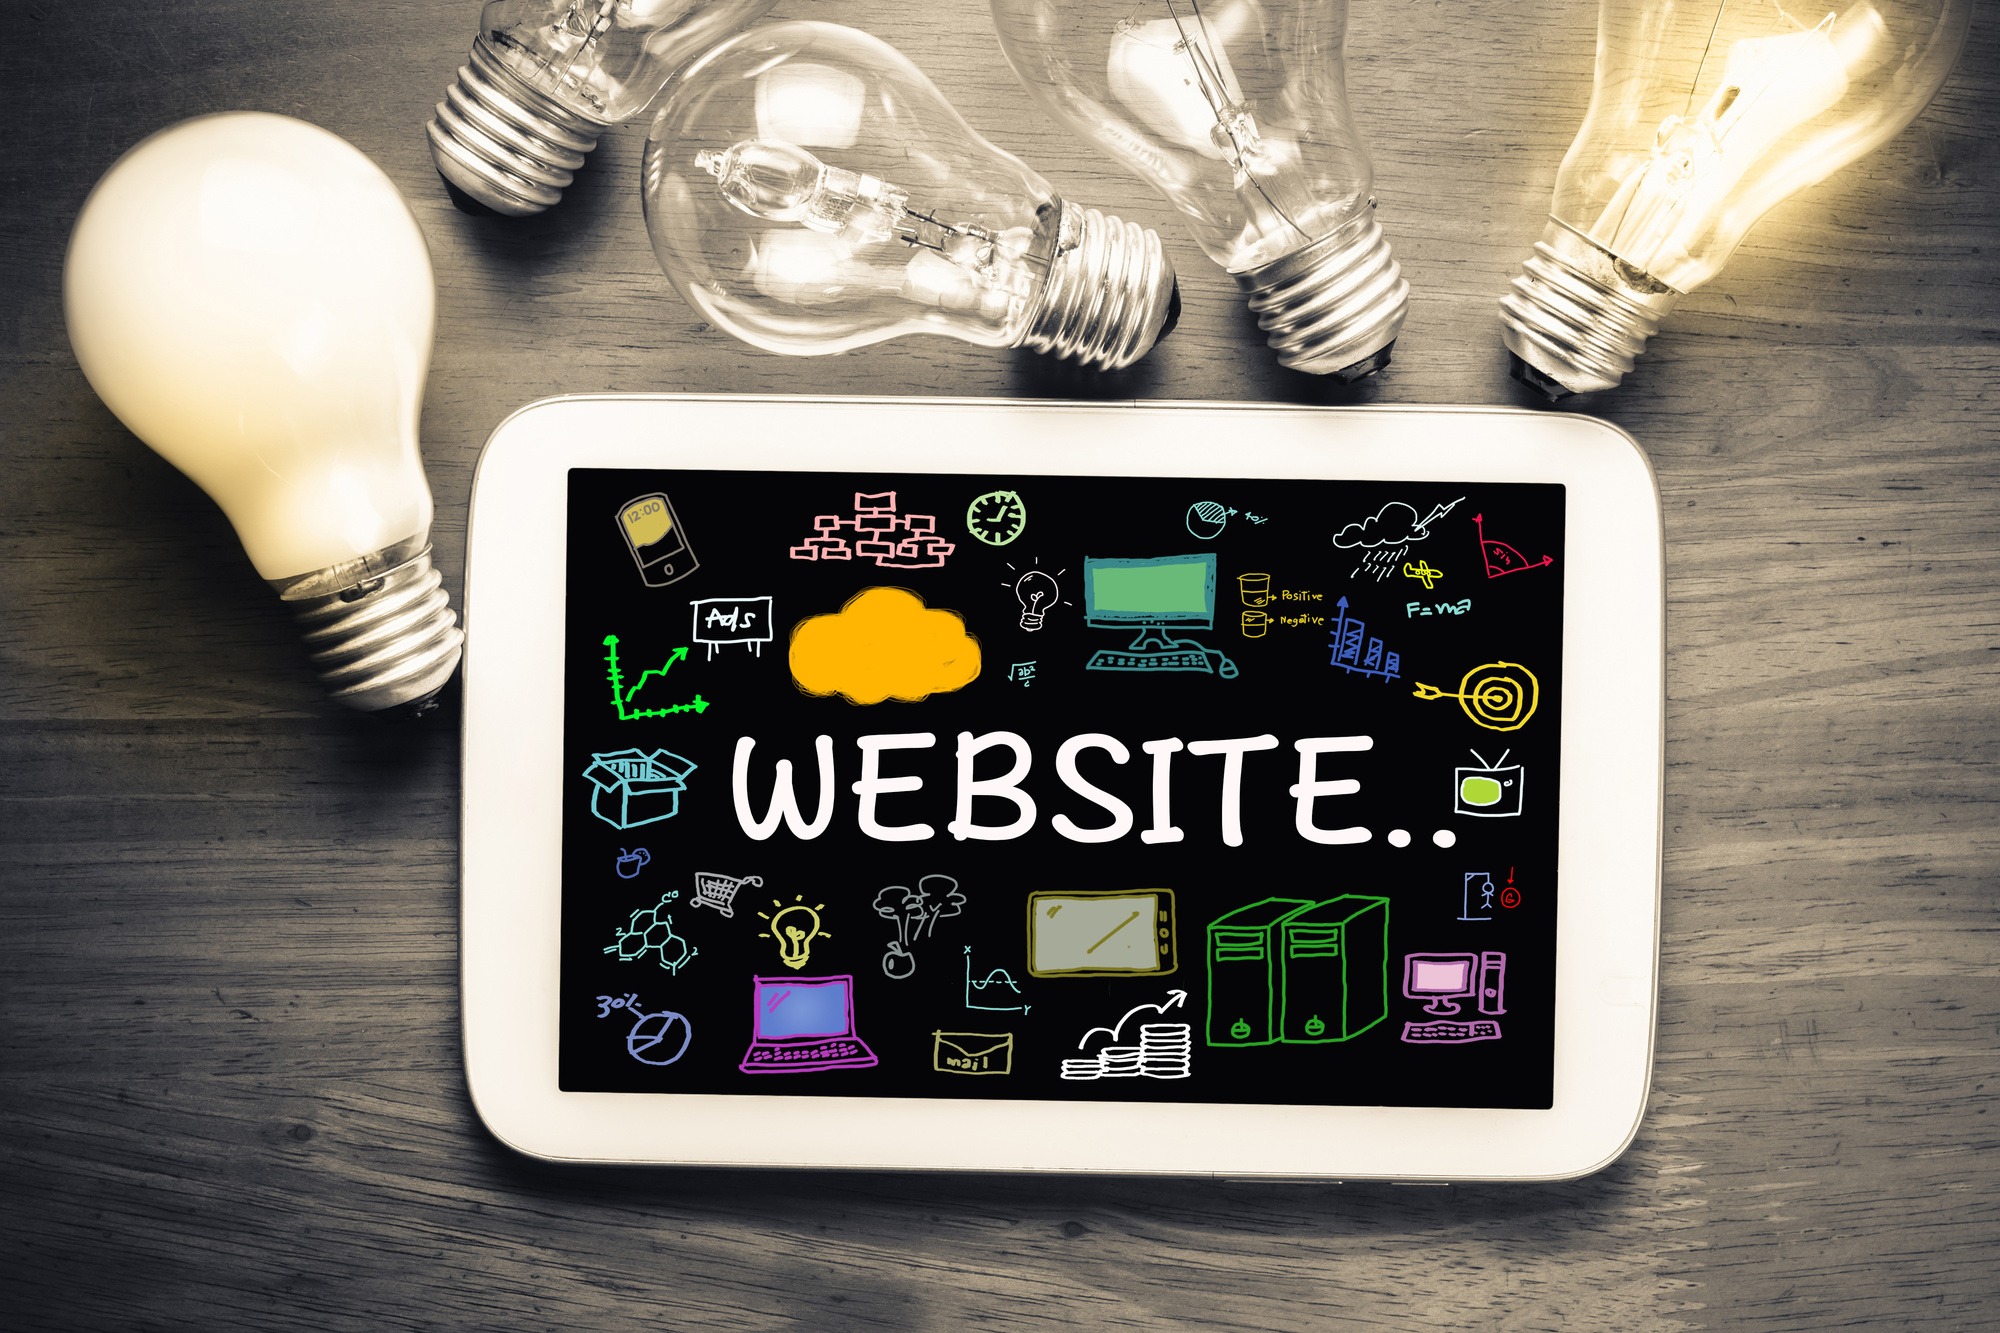 Essential Website Building Tips You Can Count On